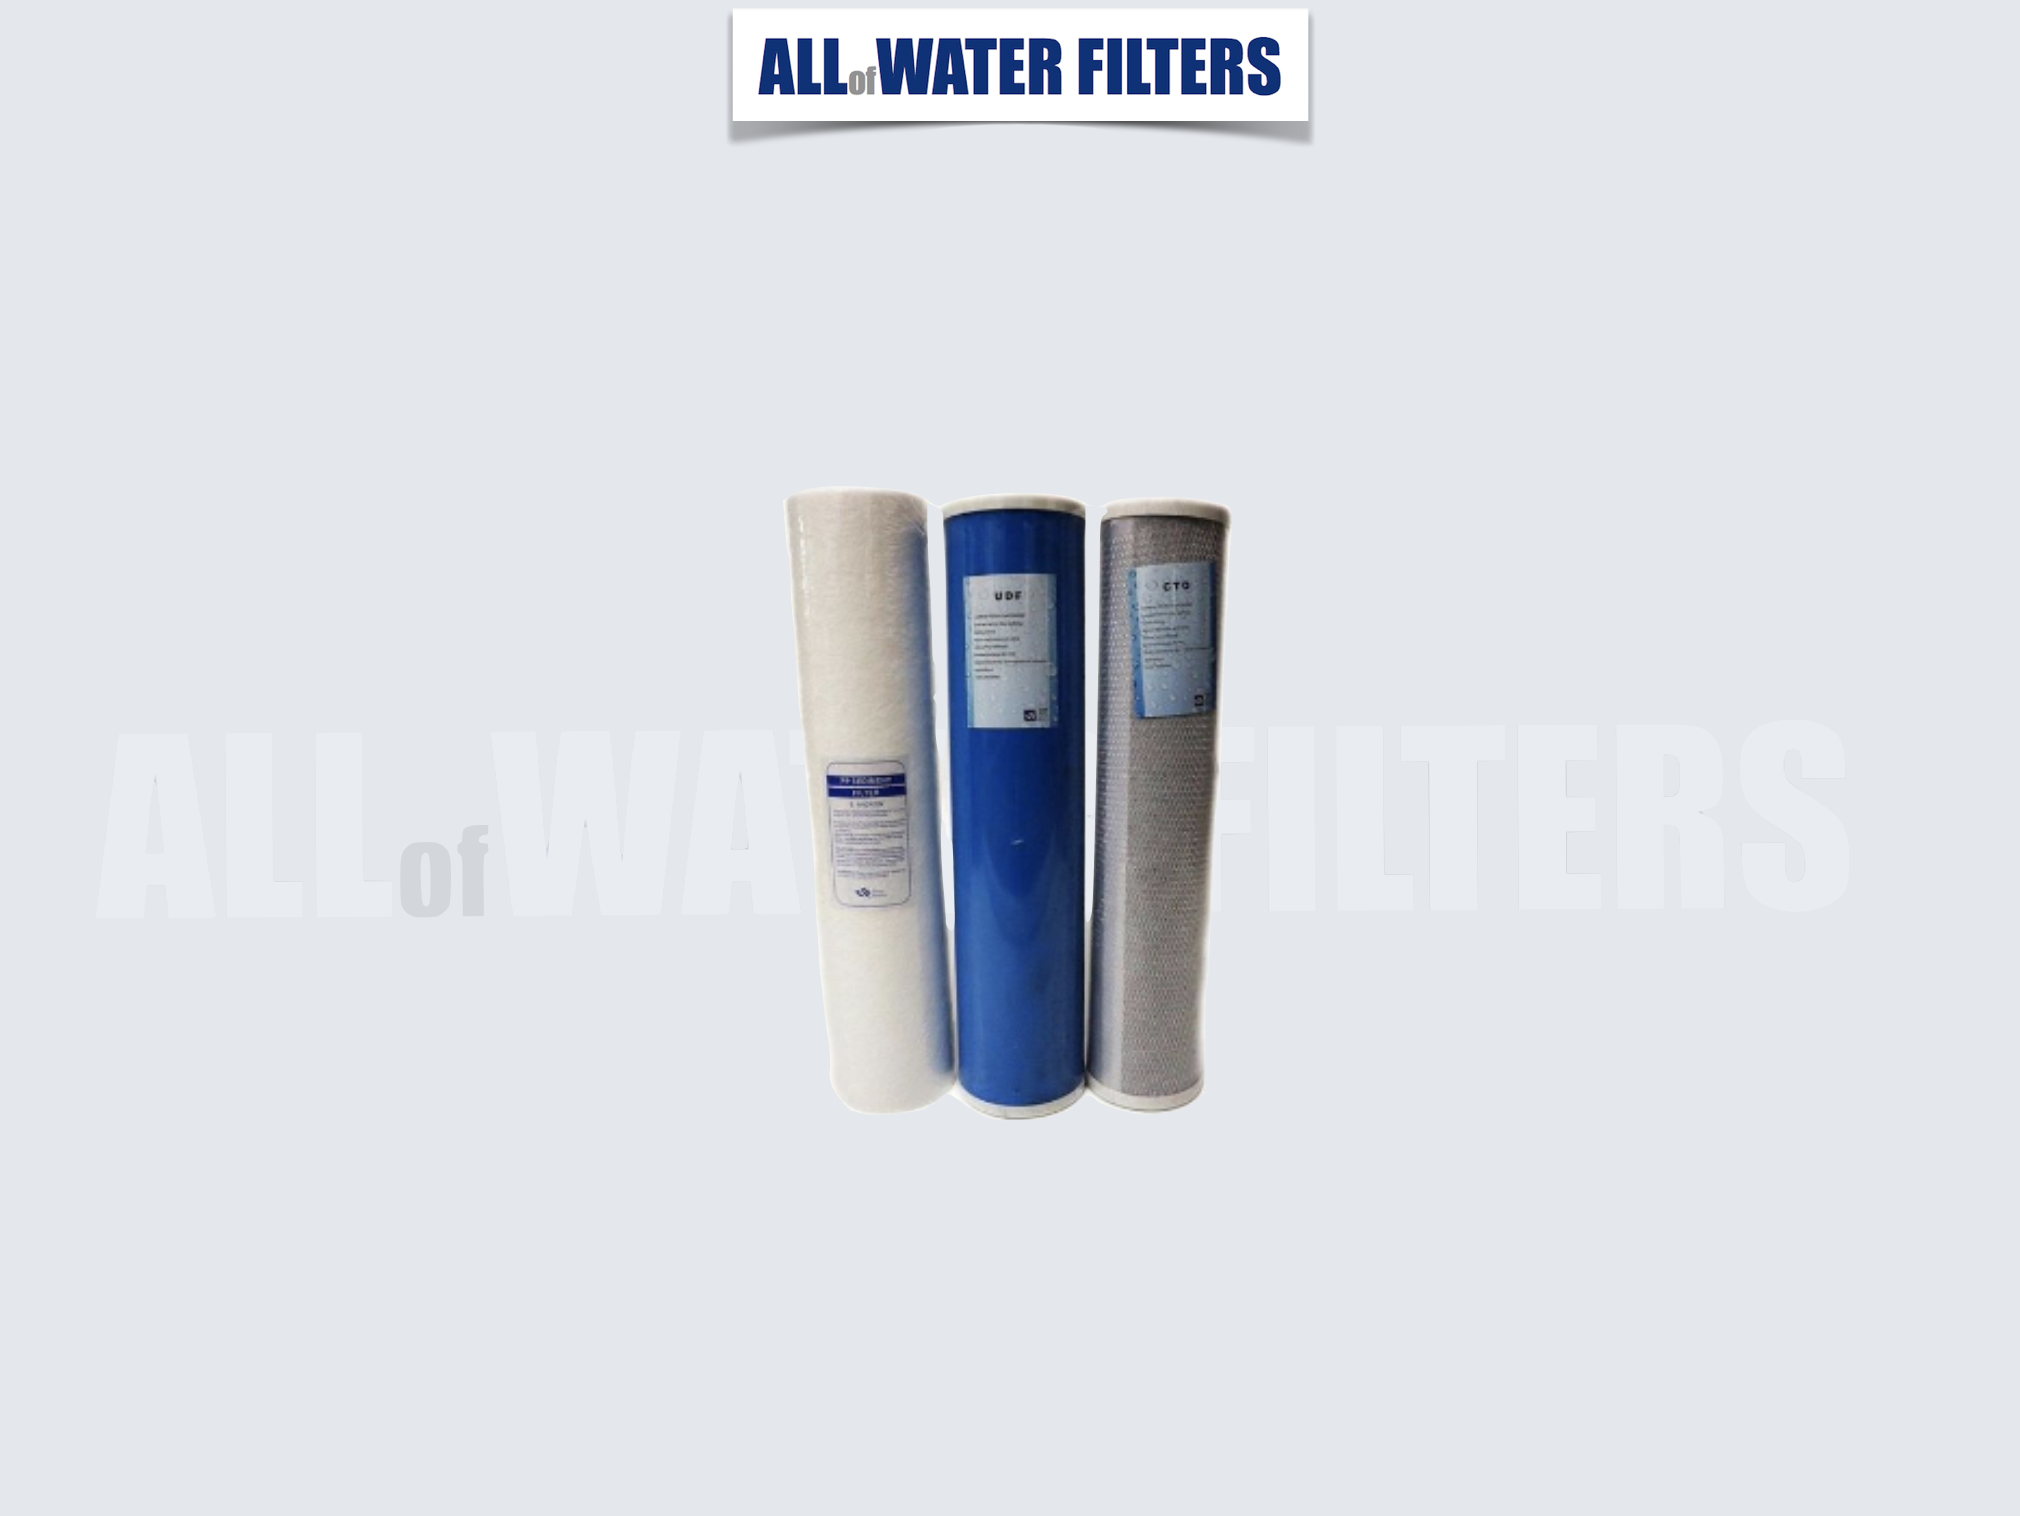 filter-set-3-stage-big-blue-20''-fat-ppgaccto